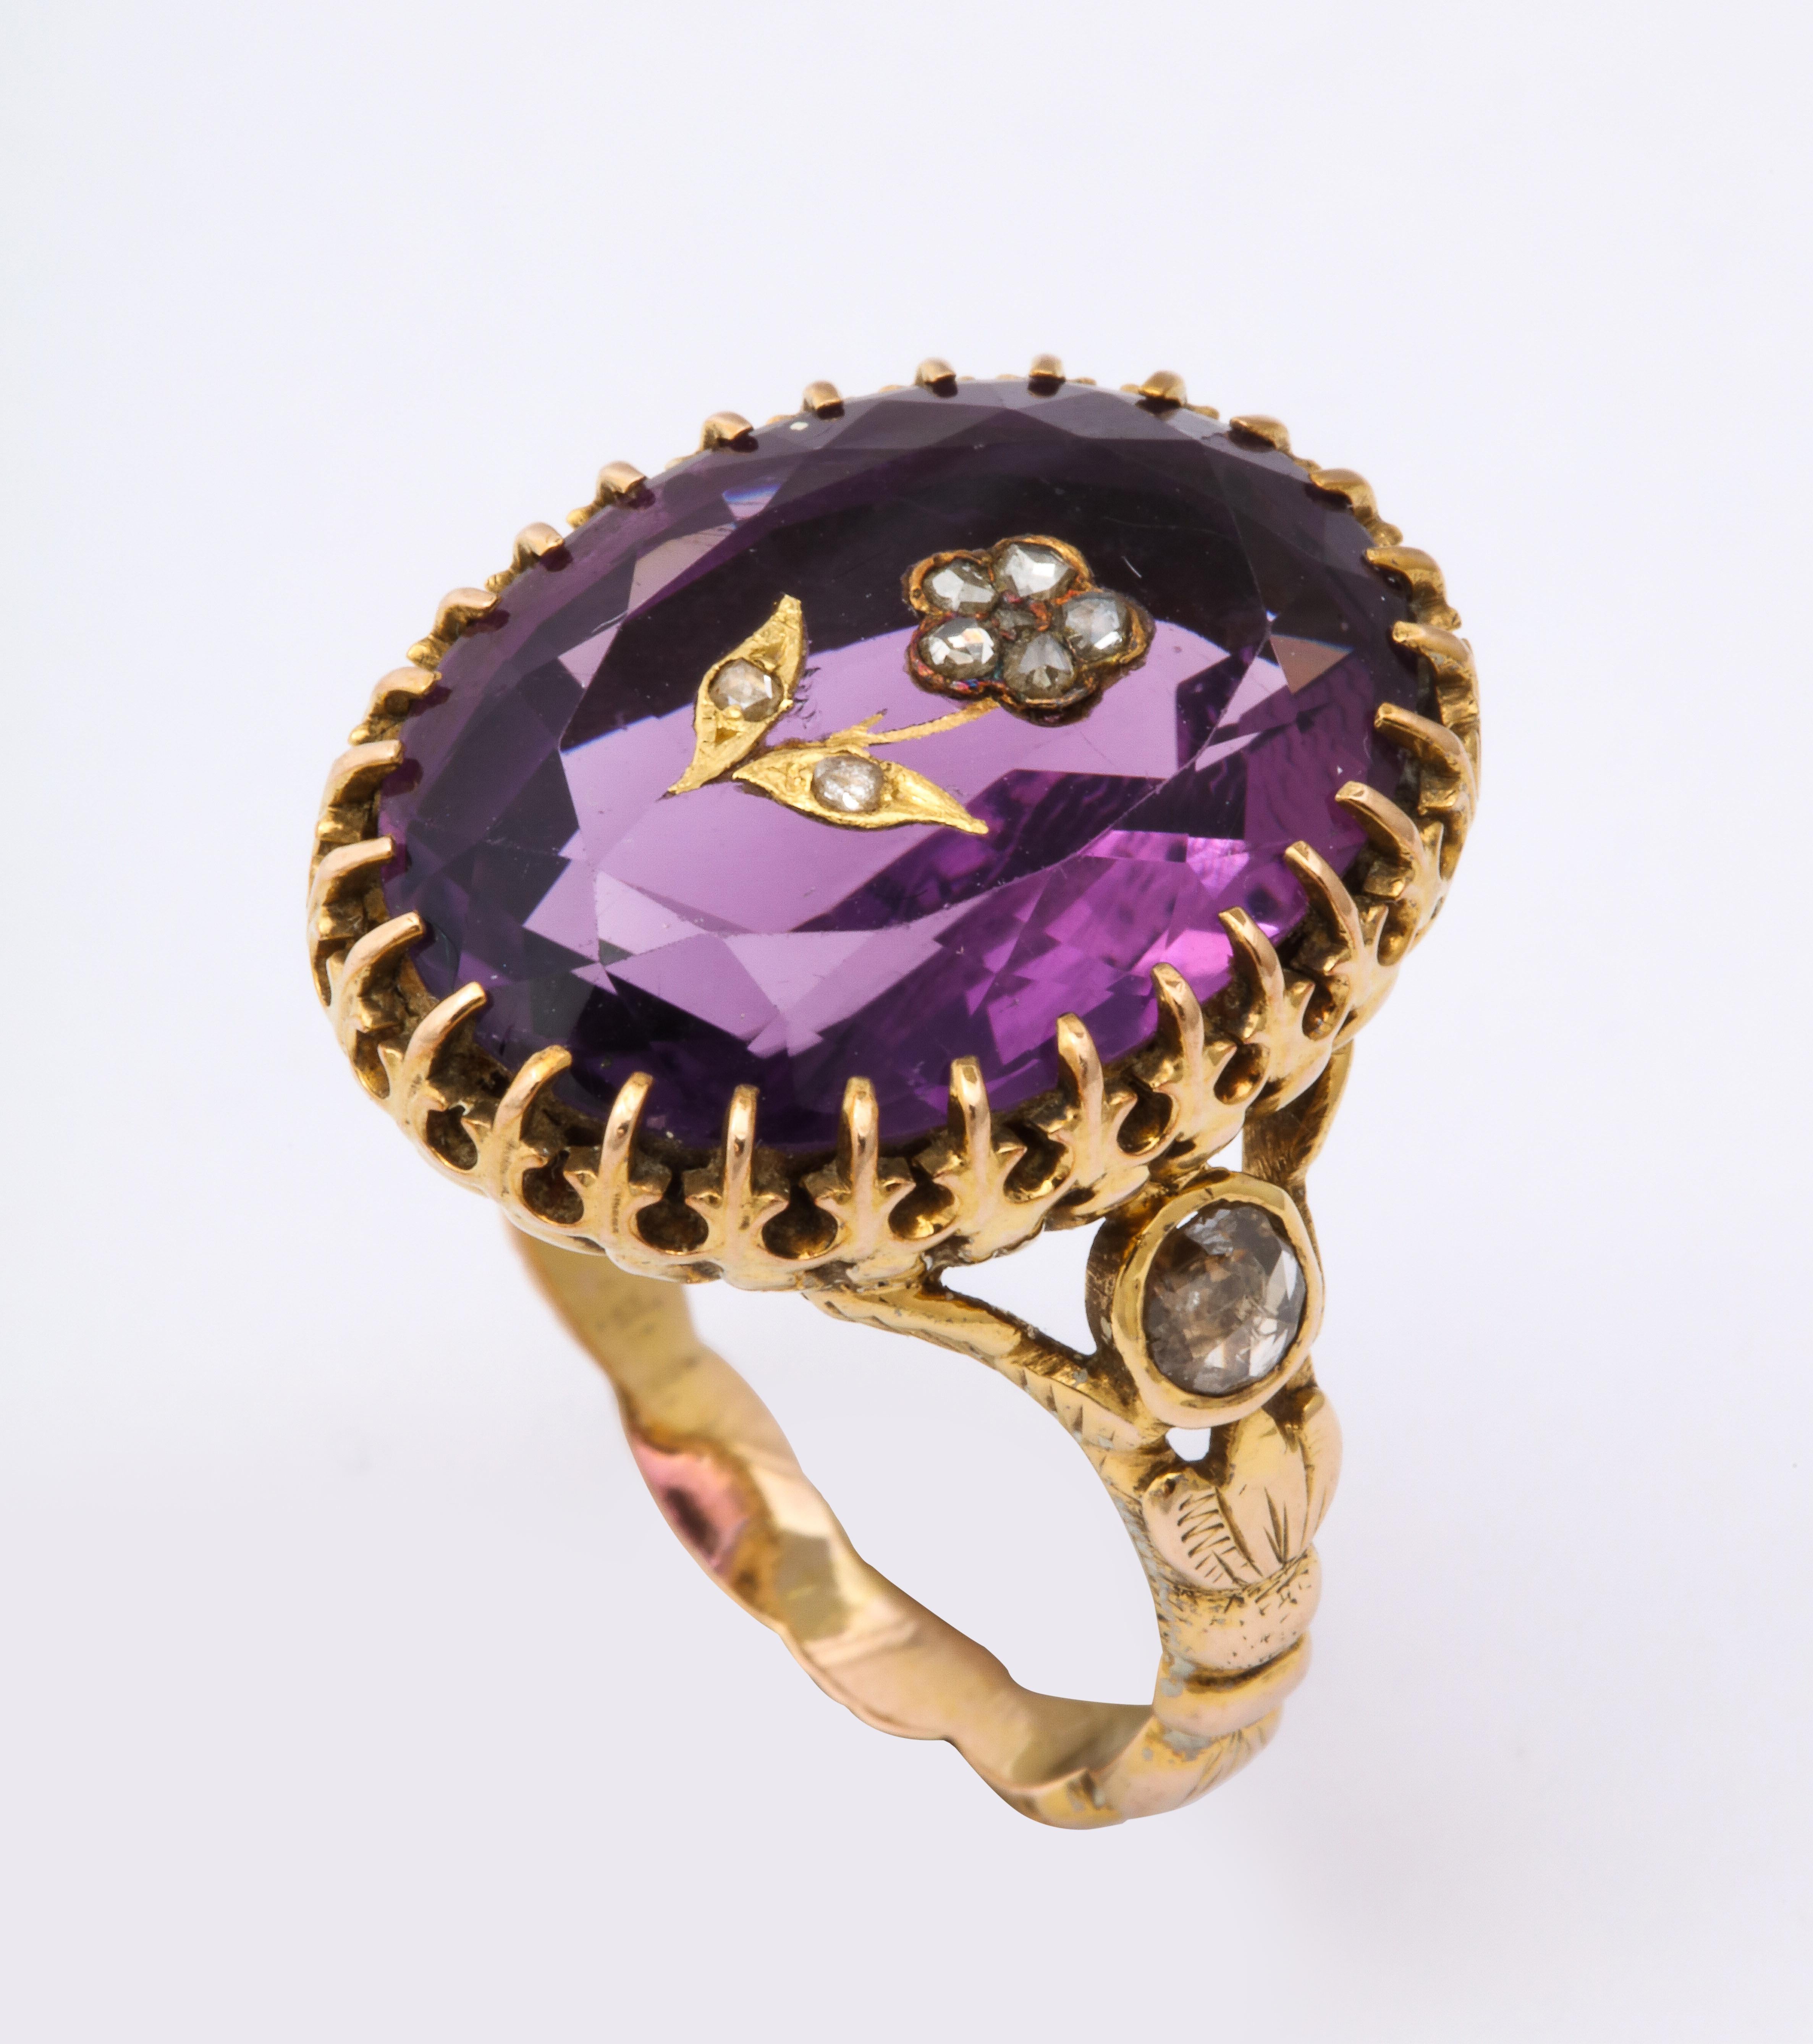 Glowing adjectives are necessary because this is an exquisite, gem amethyst ring of 9 1/2 ct, center set with gold for-get-me not flower with diamond petals. There are two accent .3 diamonds on the shoulders. Sumptuous 15 Kt. gold on the girdle and